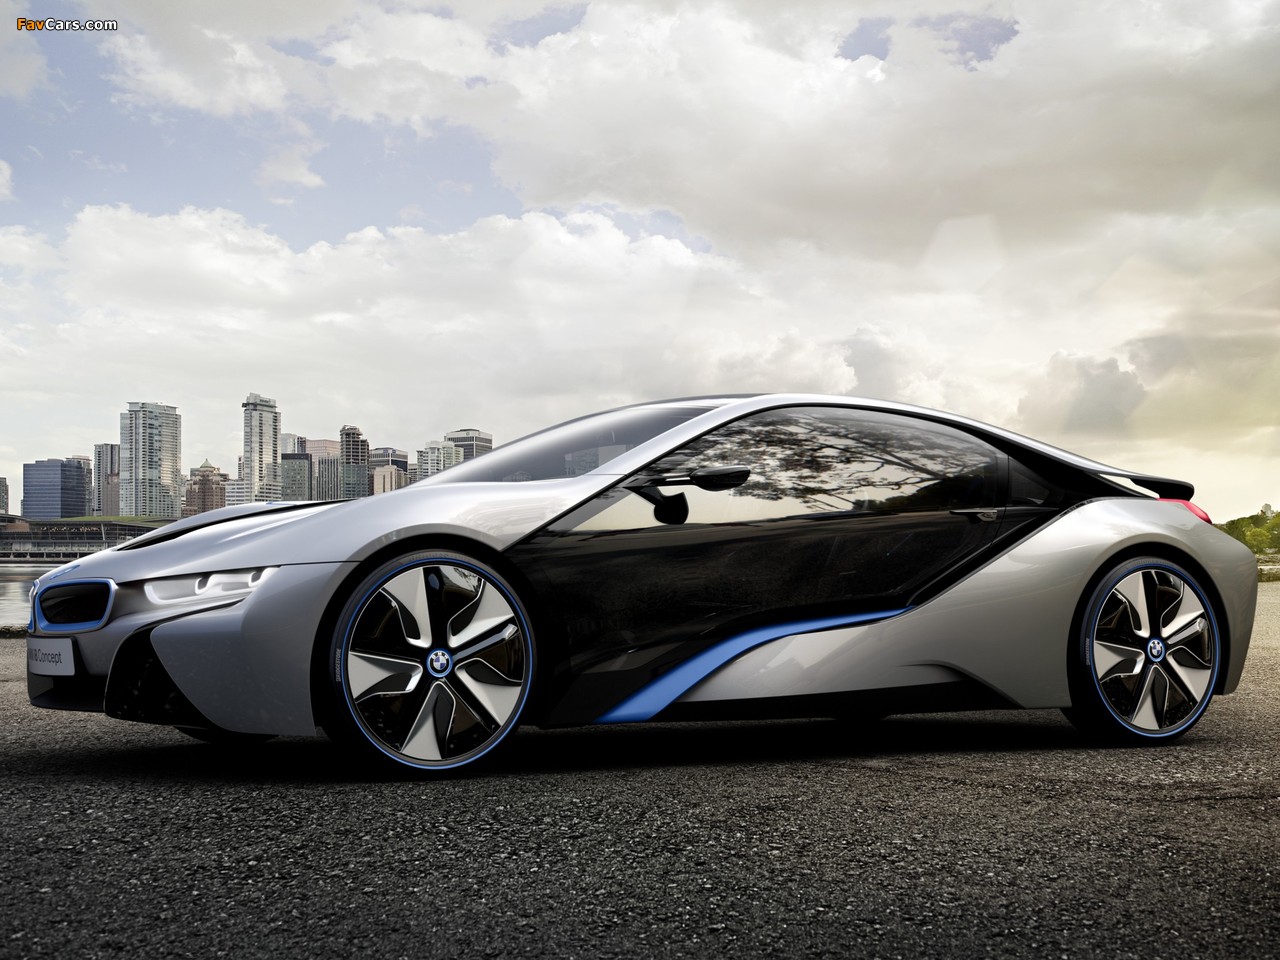 BMW i8 Concept 2011 pictures (1280 x 960)